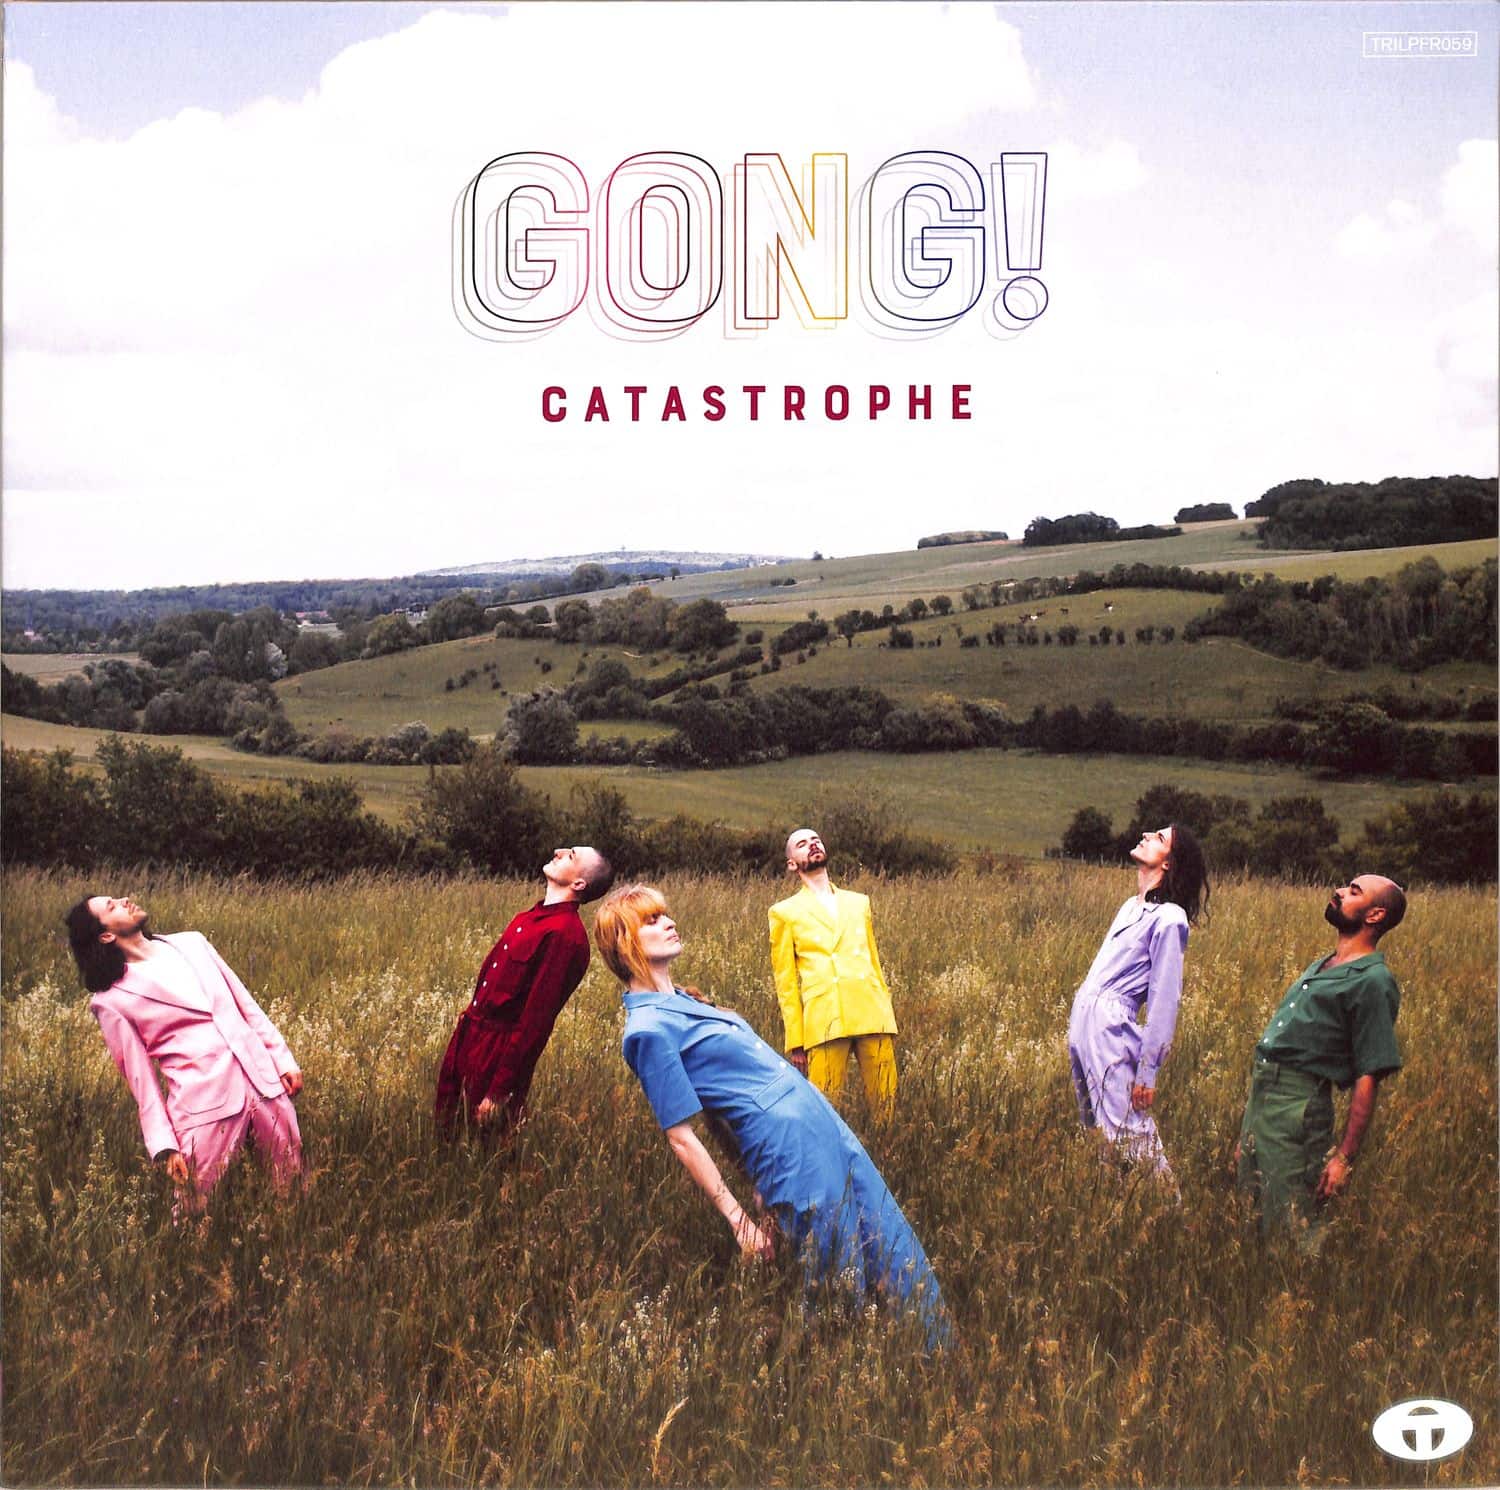 Catastrophe - GONG! 